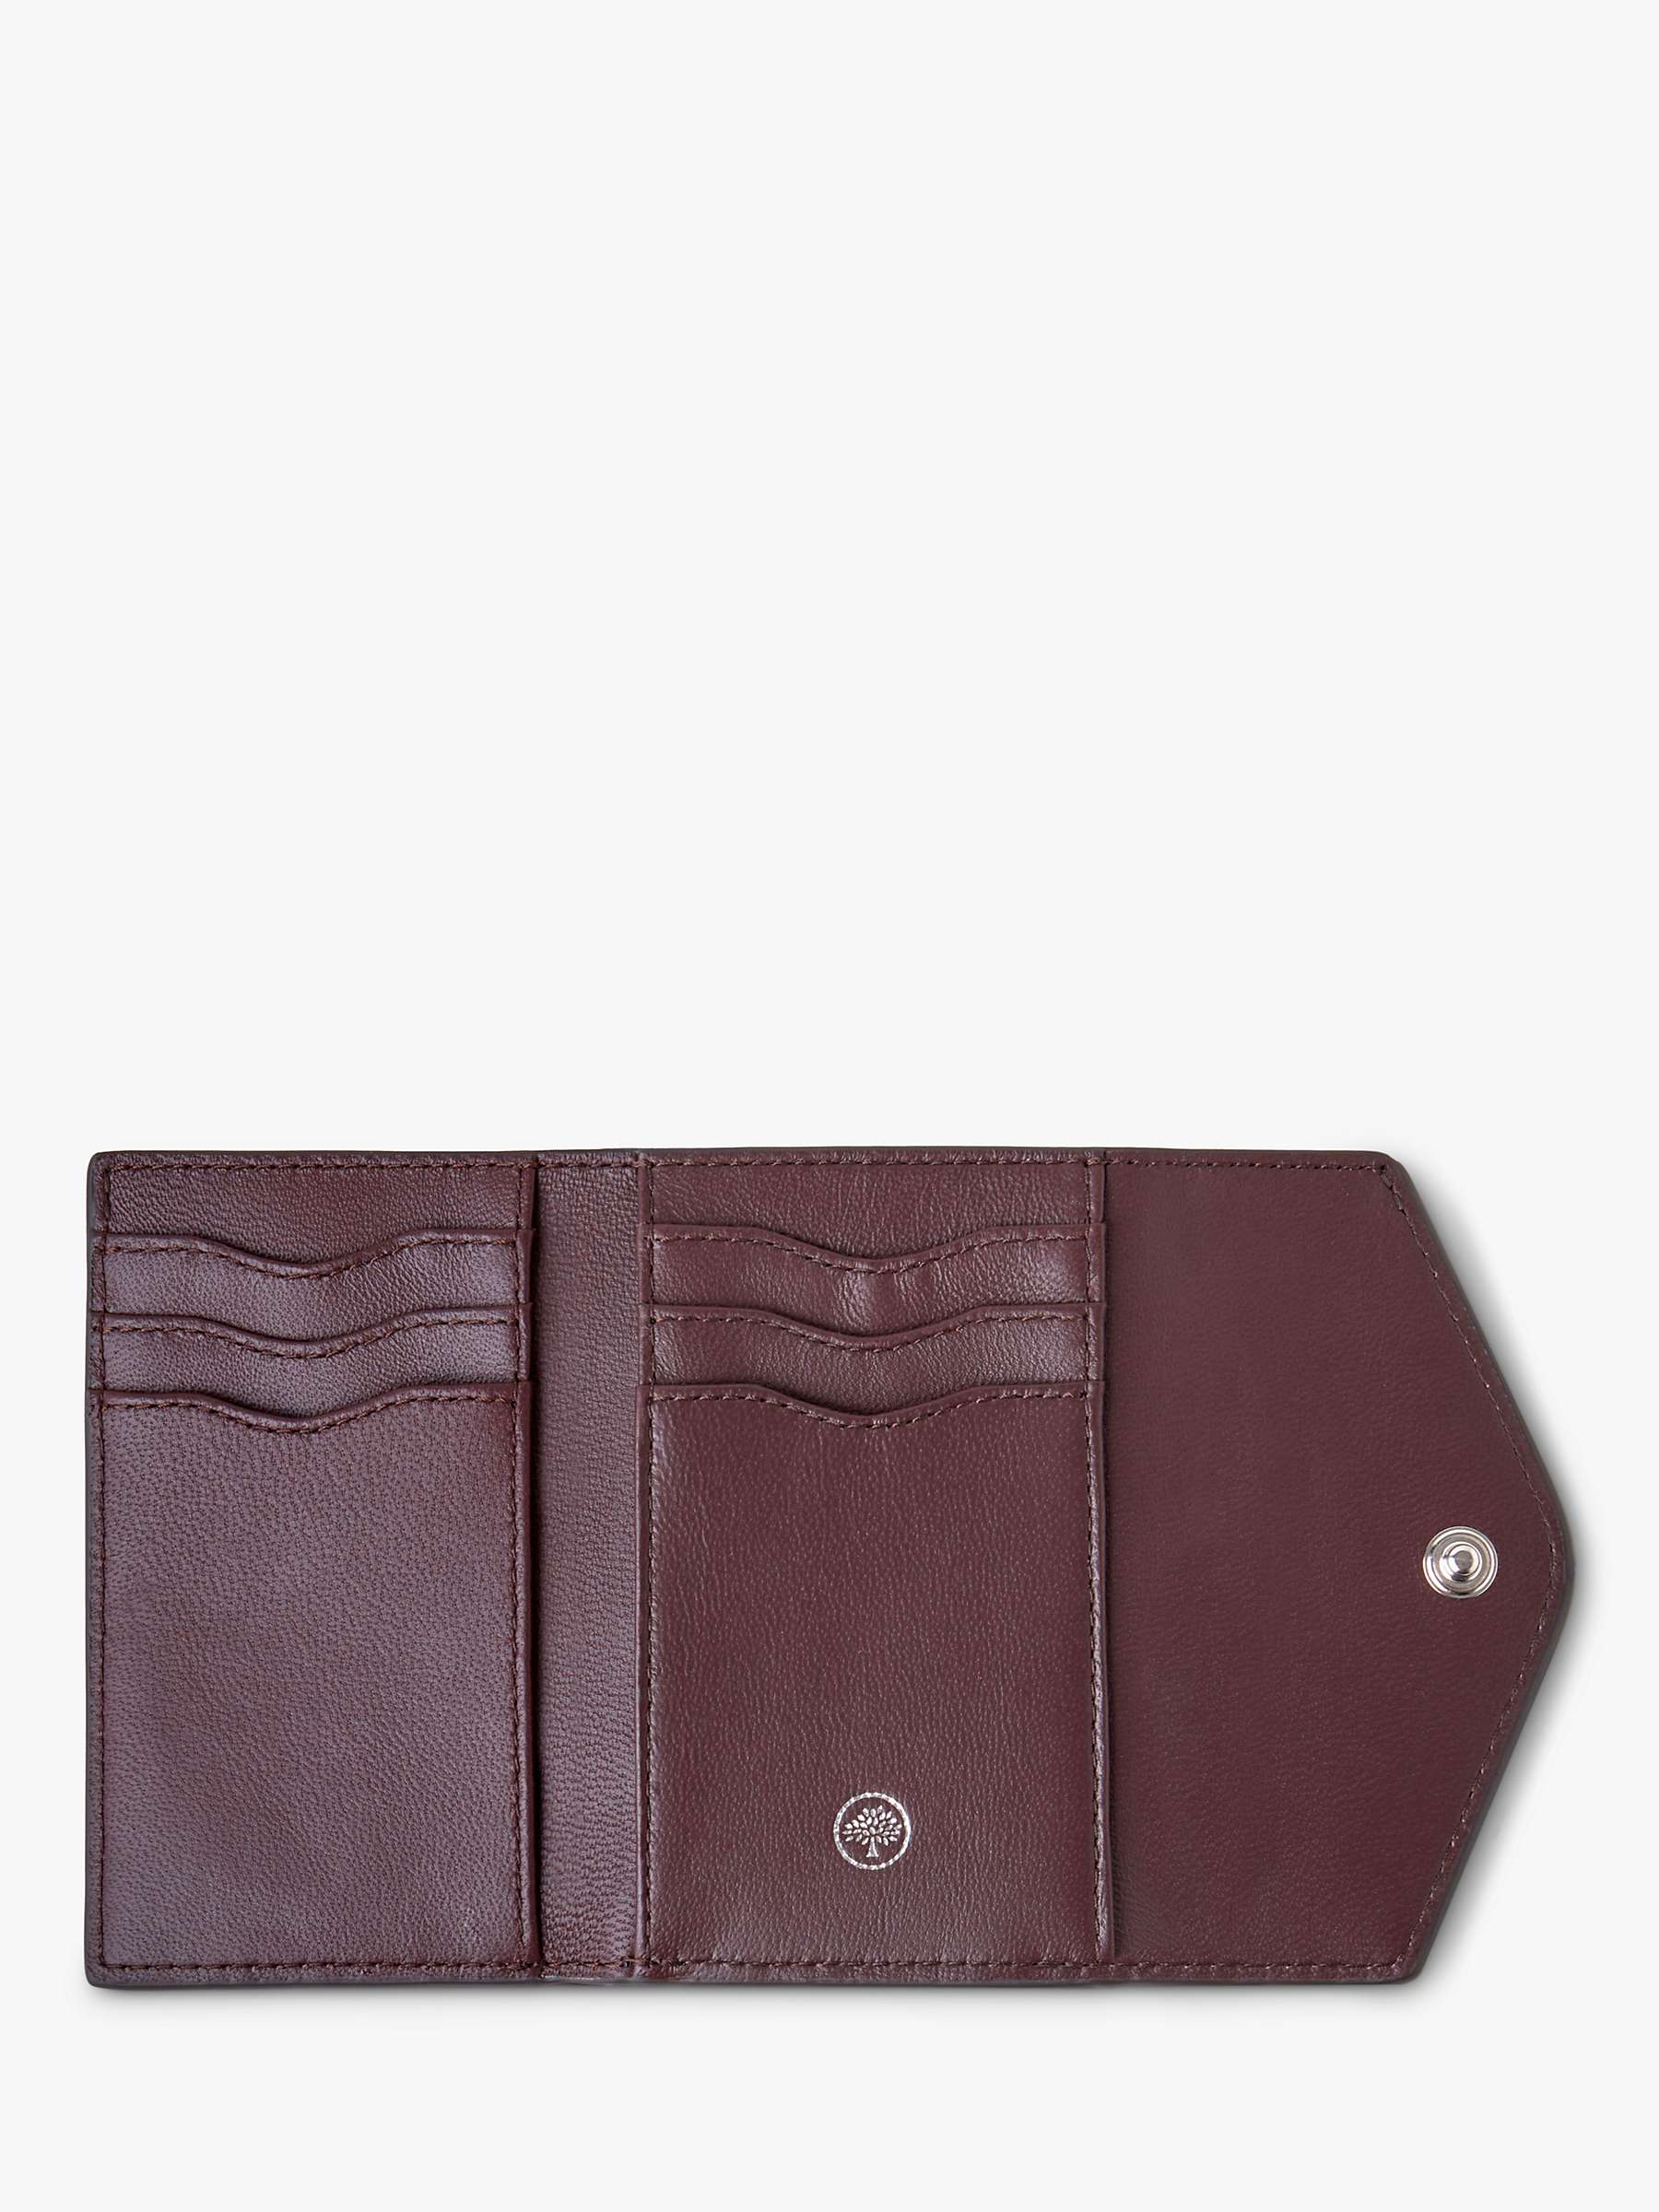 Buy Mulberry Folded Multi-Card Micro Classic Grain Leather Wallet Online at johnlewis.com